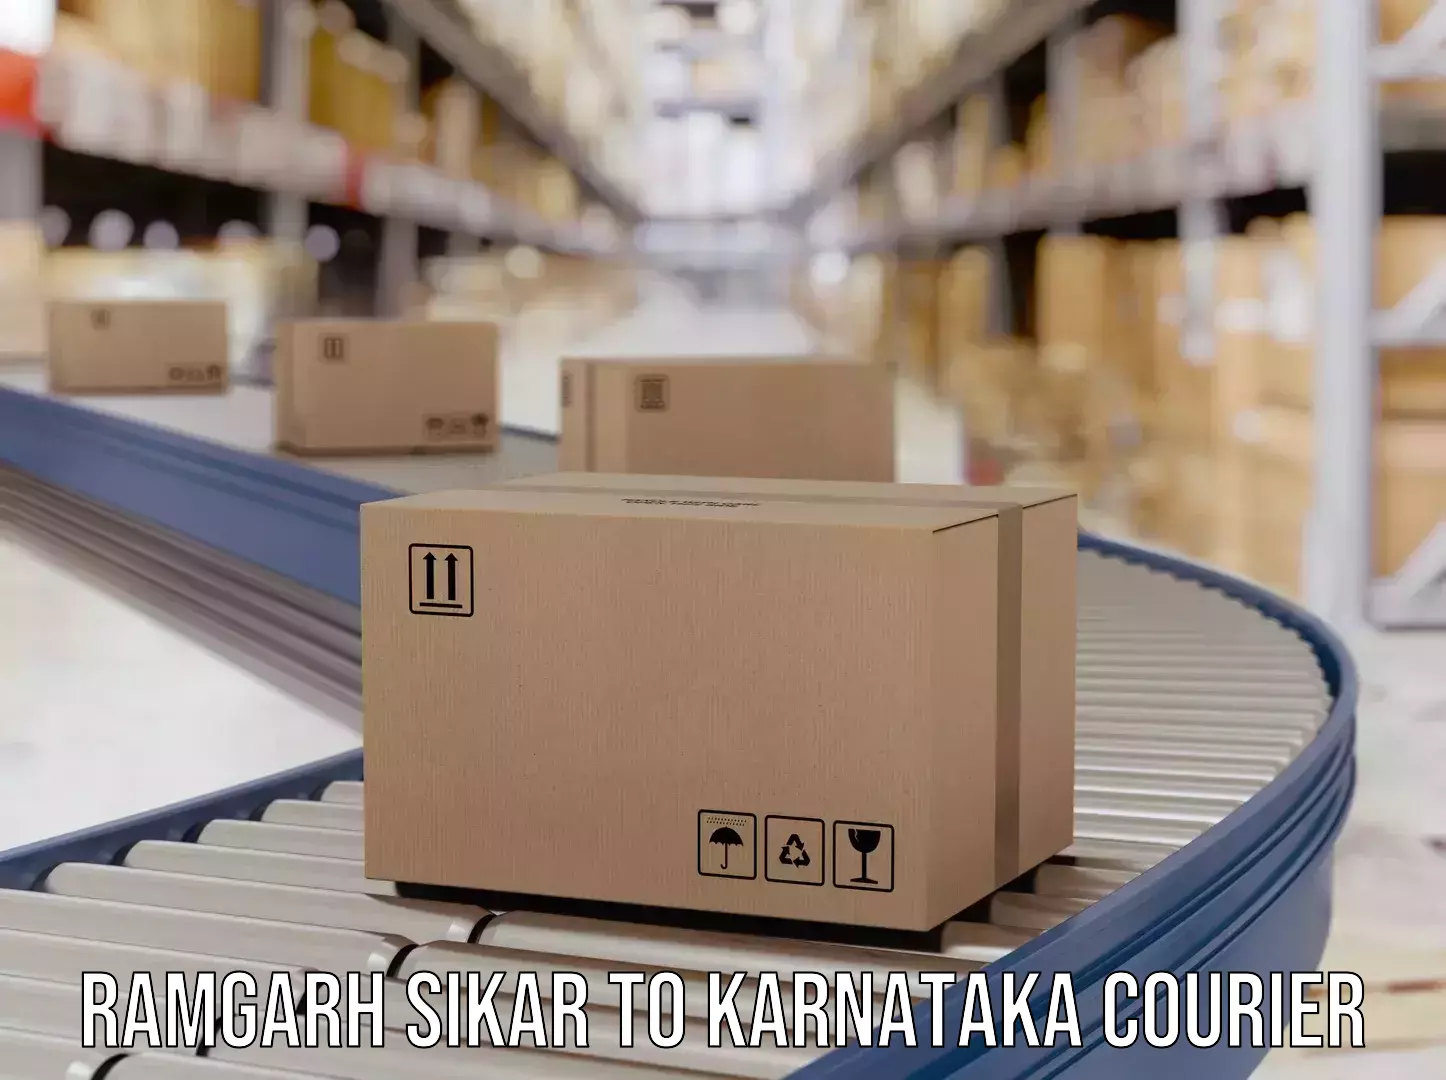 Courier service innovation Ramgarh Sikar to IIT Dharwad